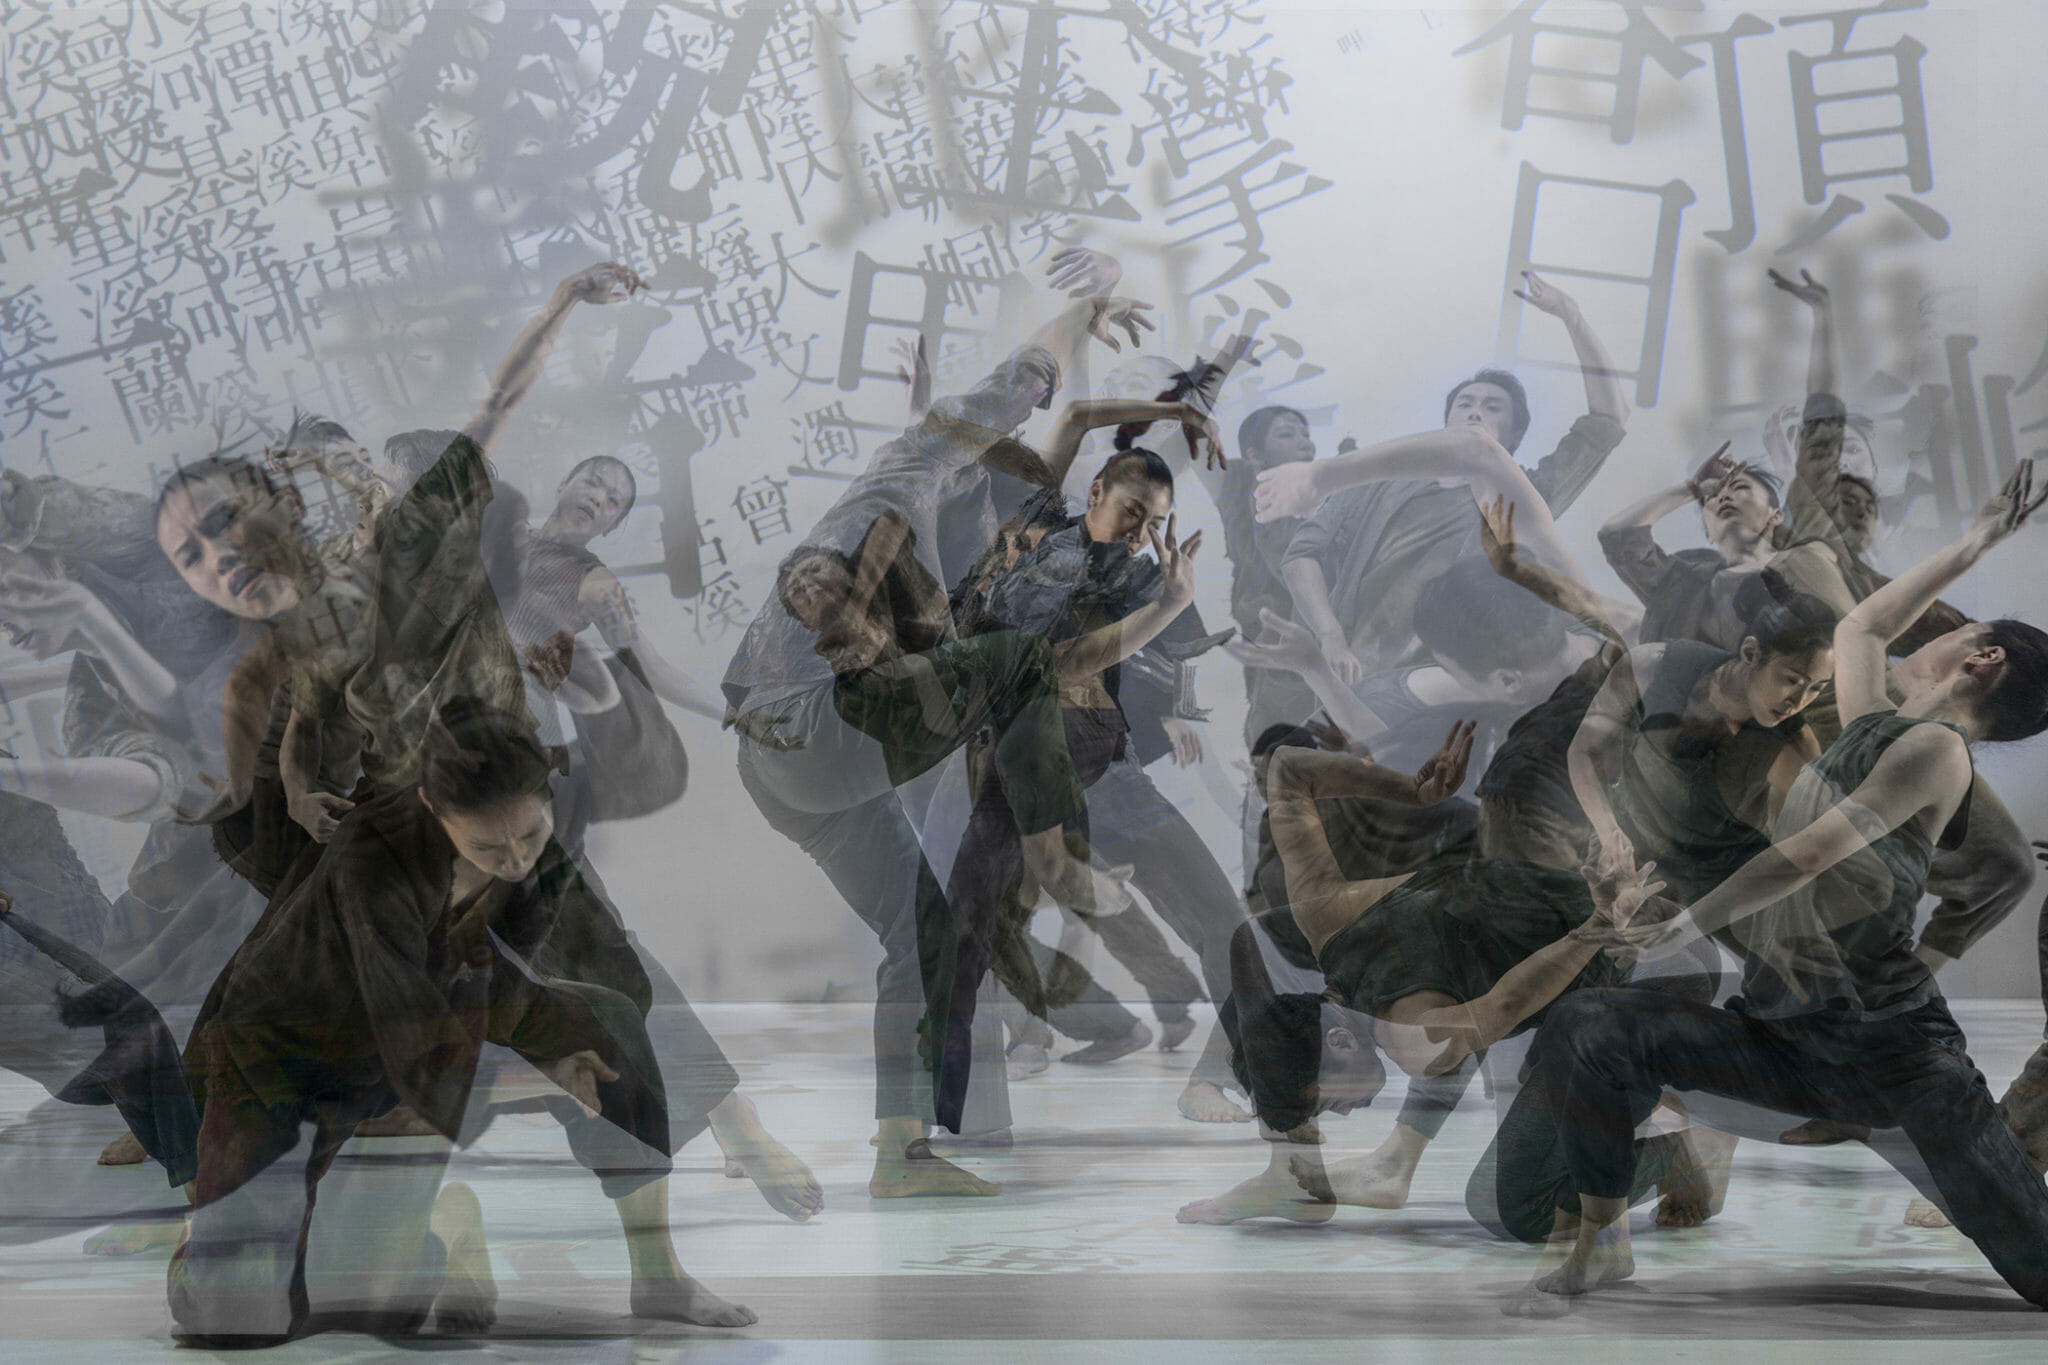 Dance Center of Columbia College Chicago and Harris Theater Present Cloud Gate Dance Theatre of Taiwan in FORMOSA: A Spiritual Journey